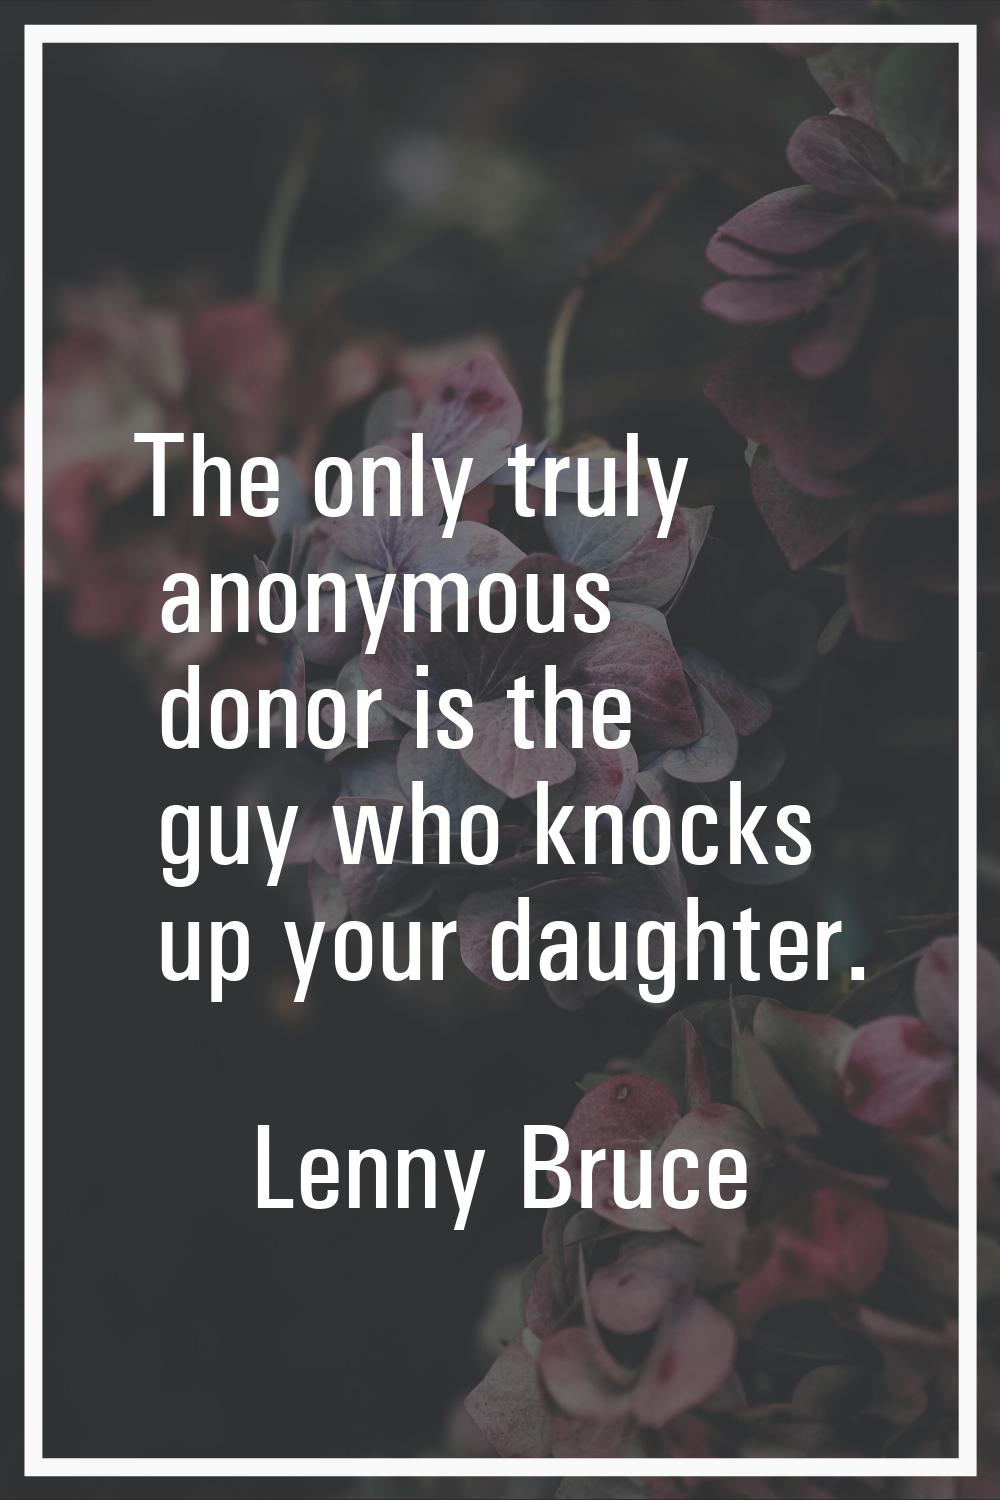 The only truly anonymous donor is the guy who knocks up your daughter.